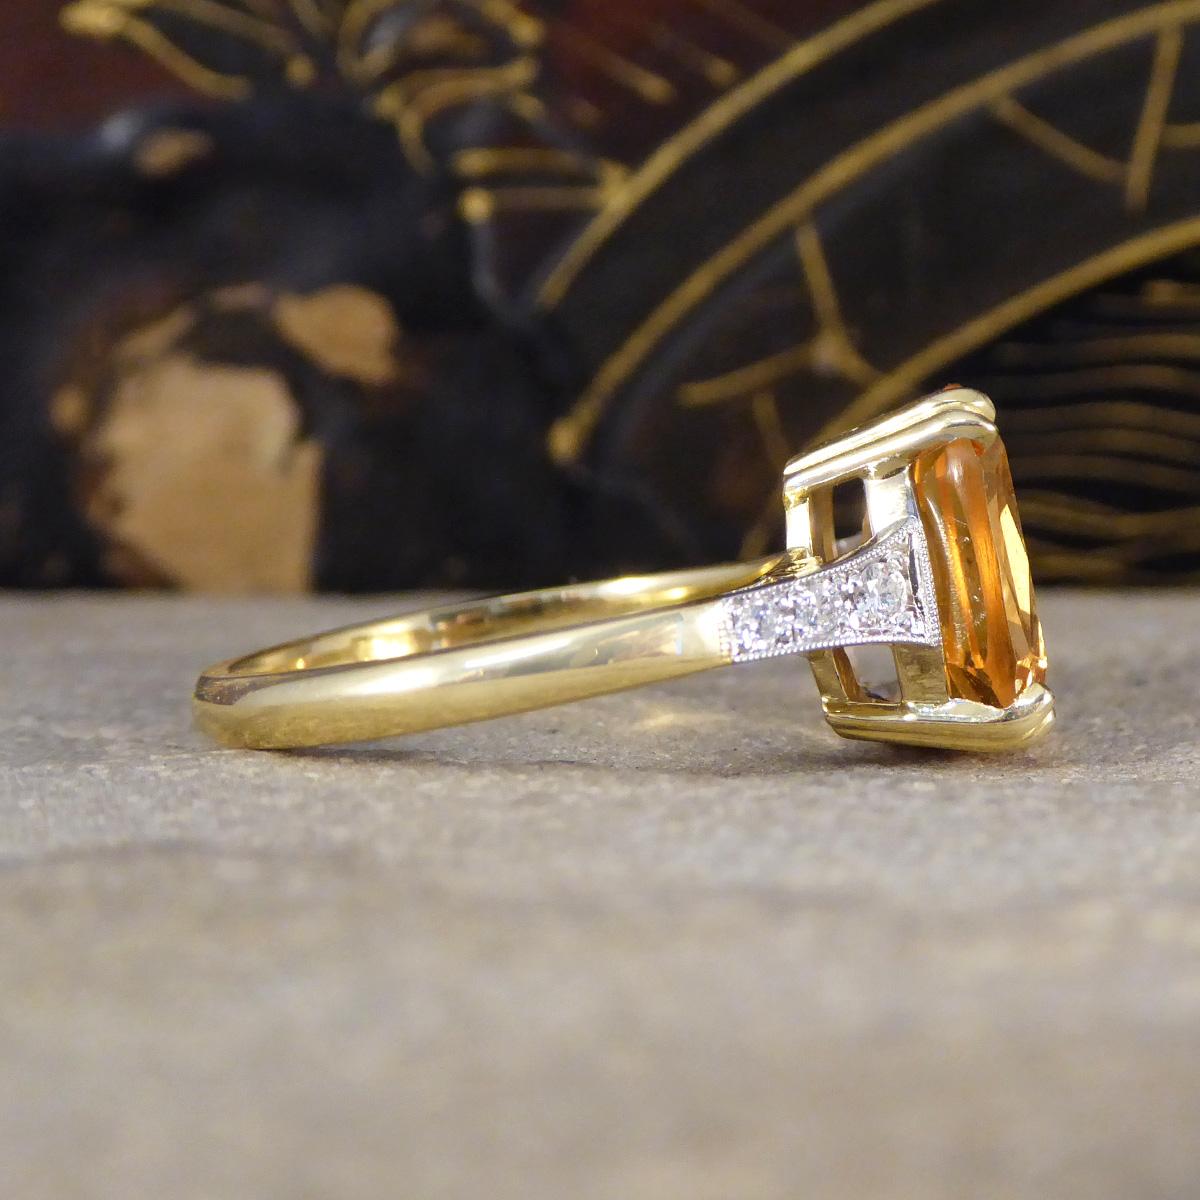 Edwardian 5.12ct Imperial Topaz Ring with Diamond Set Tapered Shoulders in 18ct Gold